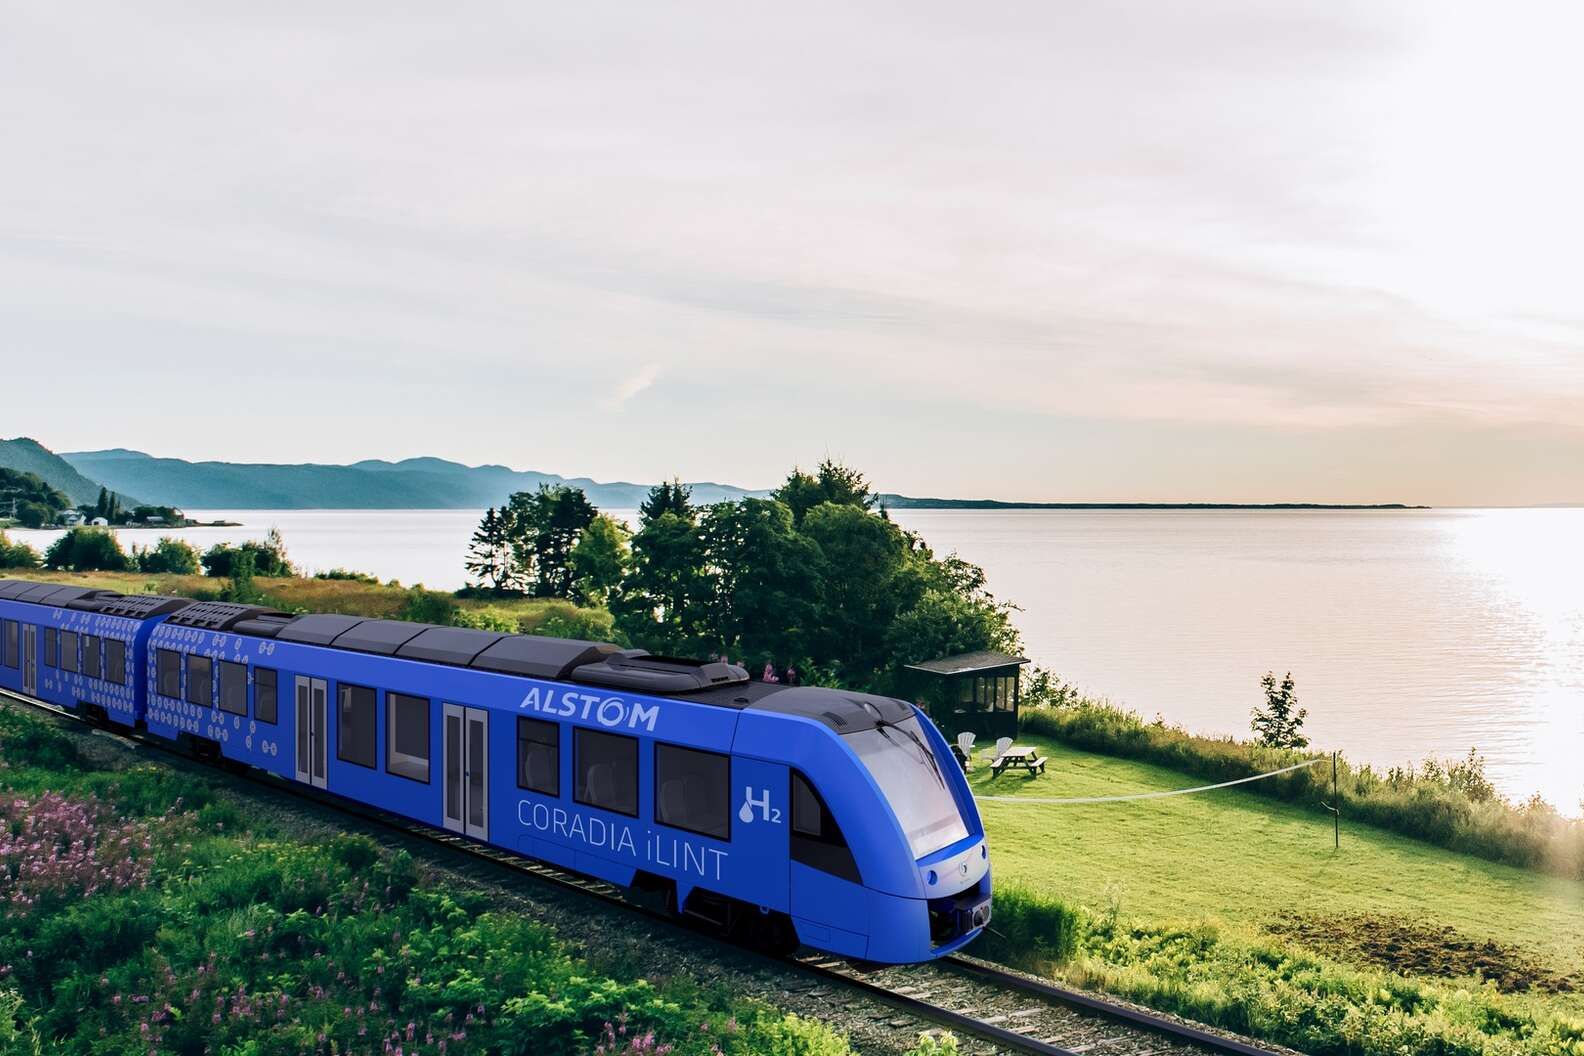 The hydrogen-powered Train de Charlevoix will run a 90-minute route between ​​Parc de la Chute-Montmorency, the site of an almost 300-foot waterfa